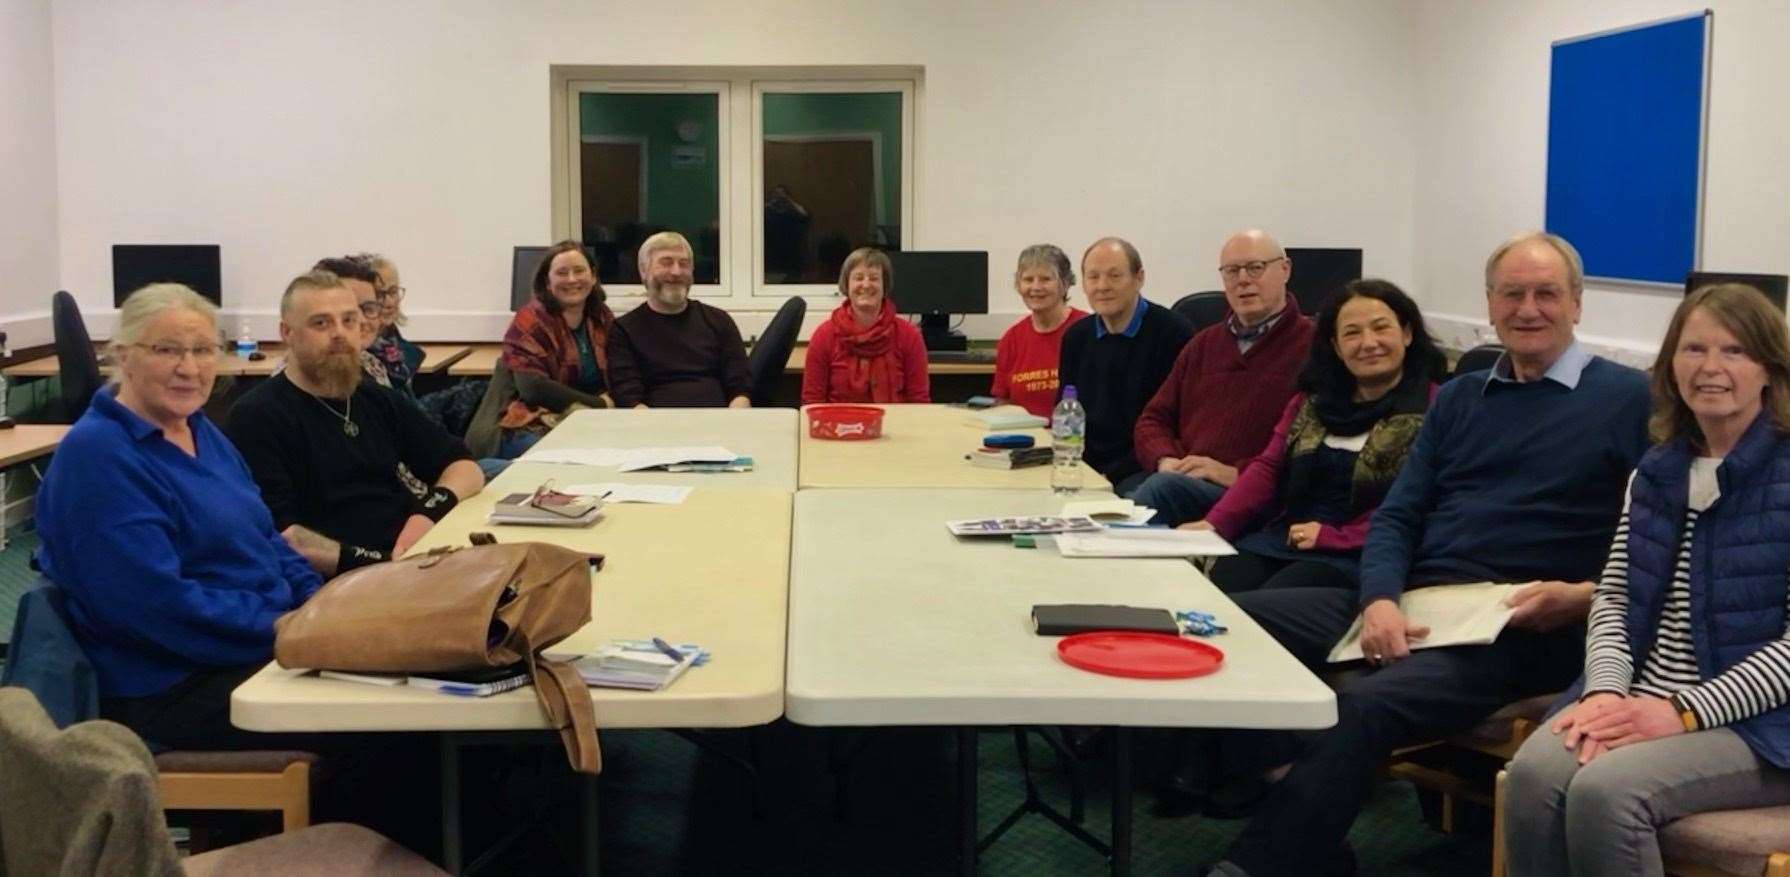 forWords writing group welcomed new attendees into the Green Room at Forres House.